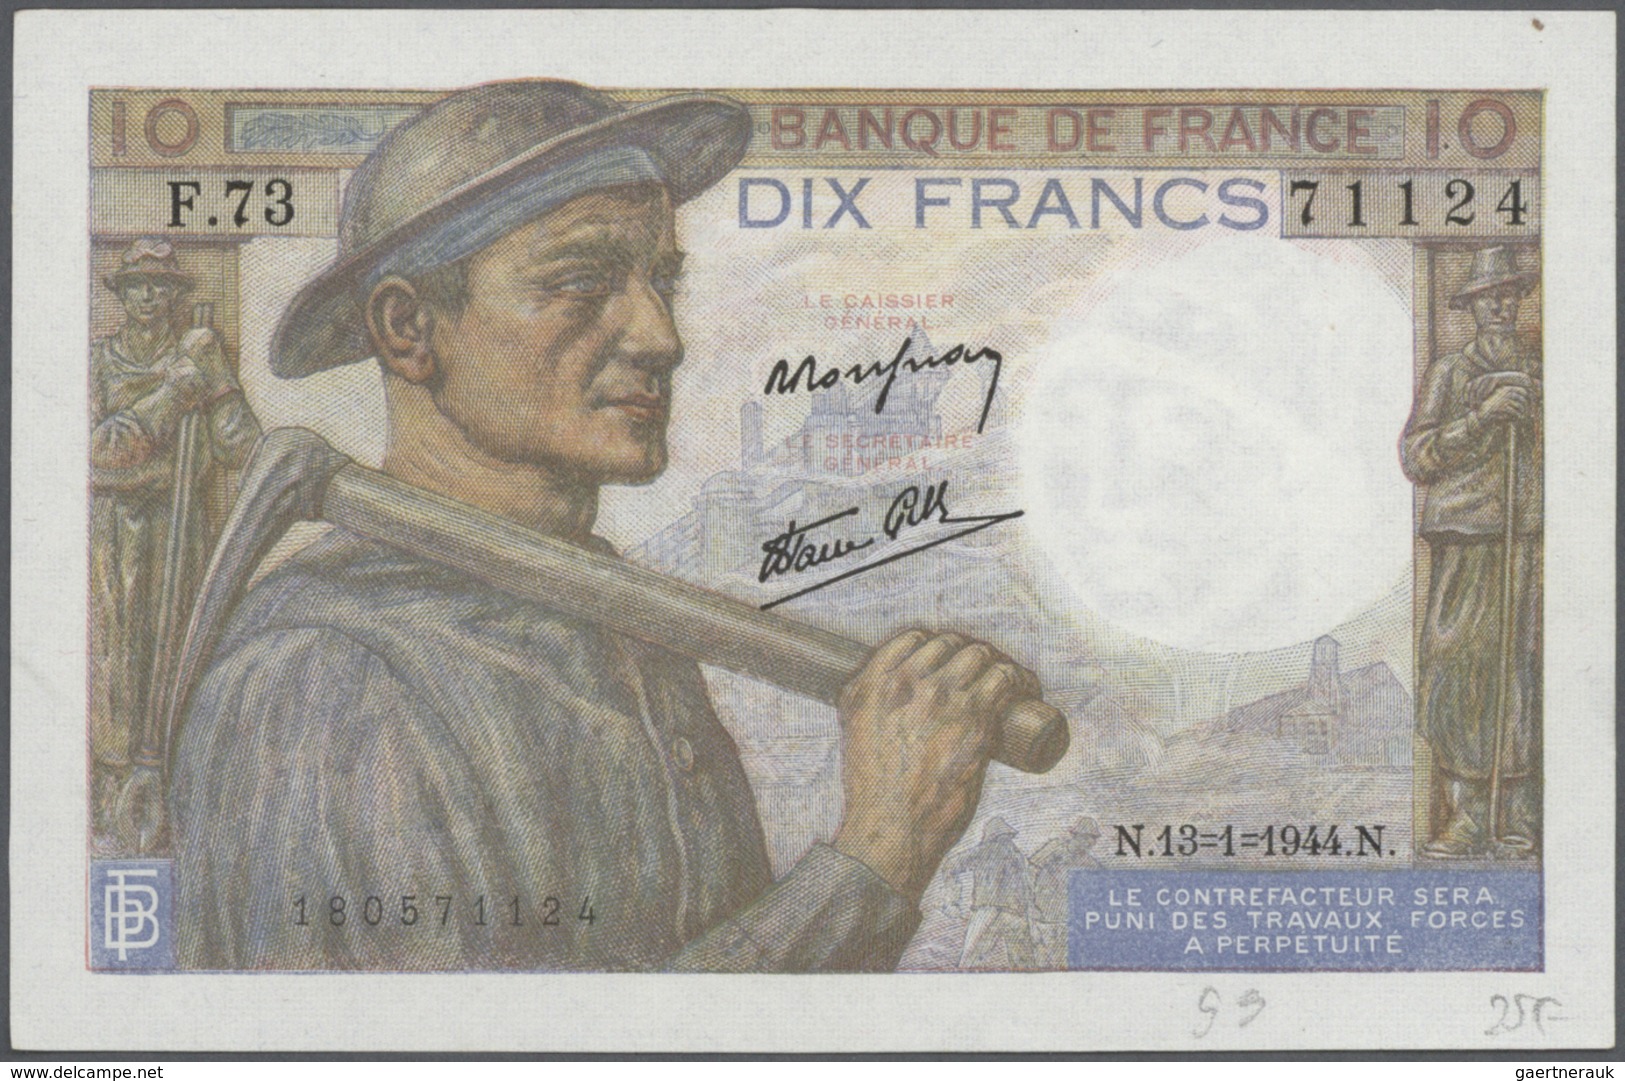 02763 France / Frankreich: very big lot of about 2000 banknotes containing 12x 100 Francs P. 71, 31x 100 F